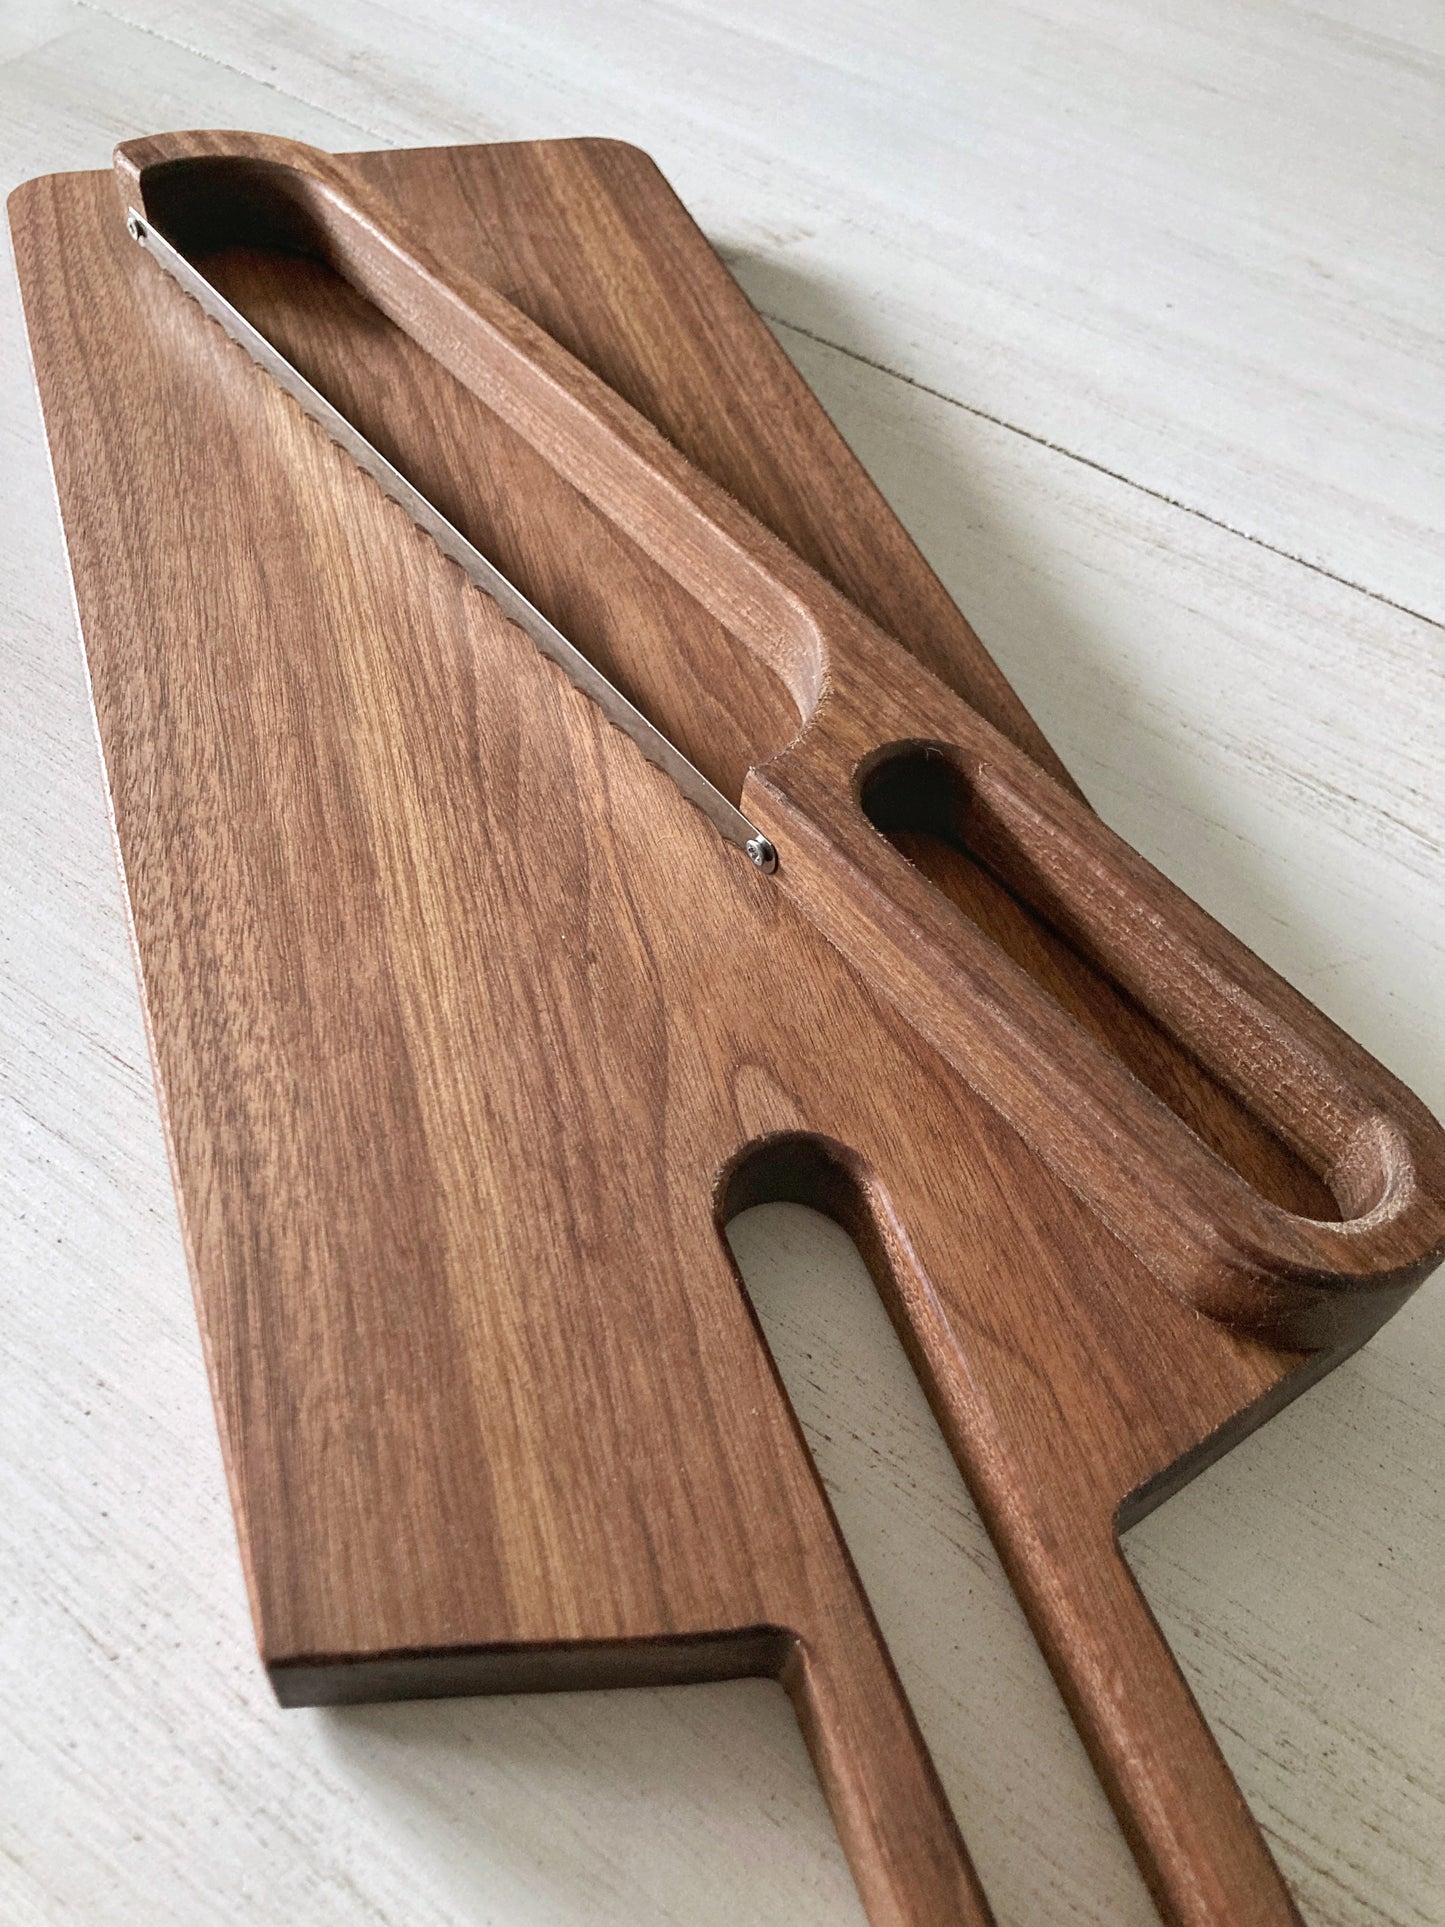 Solid walnut 2 foot long cutting board with a long oval shaped cutout handle. The matching bow cutting knife makes cutiing bread easy and the set beautiful when not in use. Use as a bread board or charcuterie board